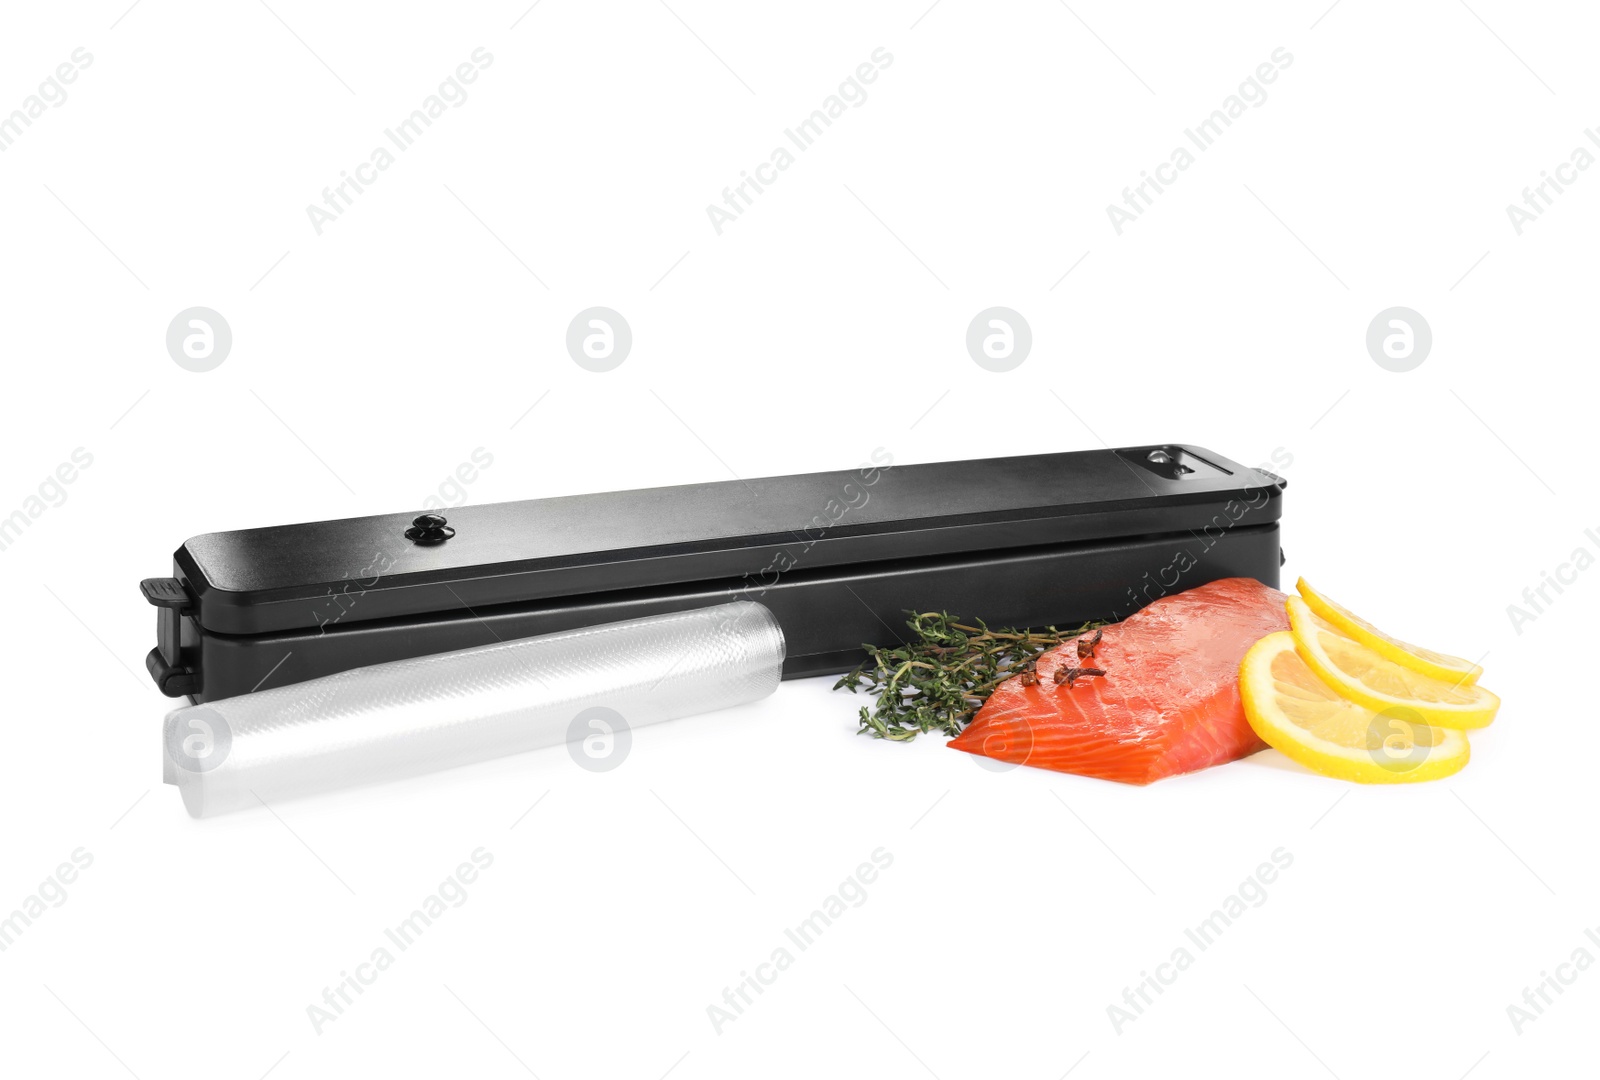 Photo of Sealer for vacuum packing, plastic bag and salmon with ingredients on white background